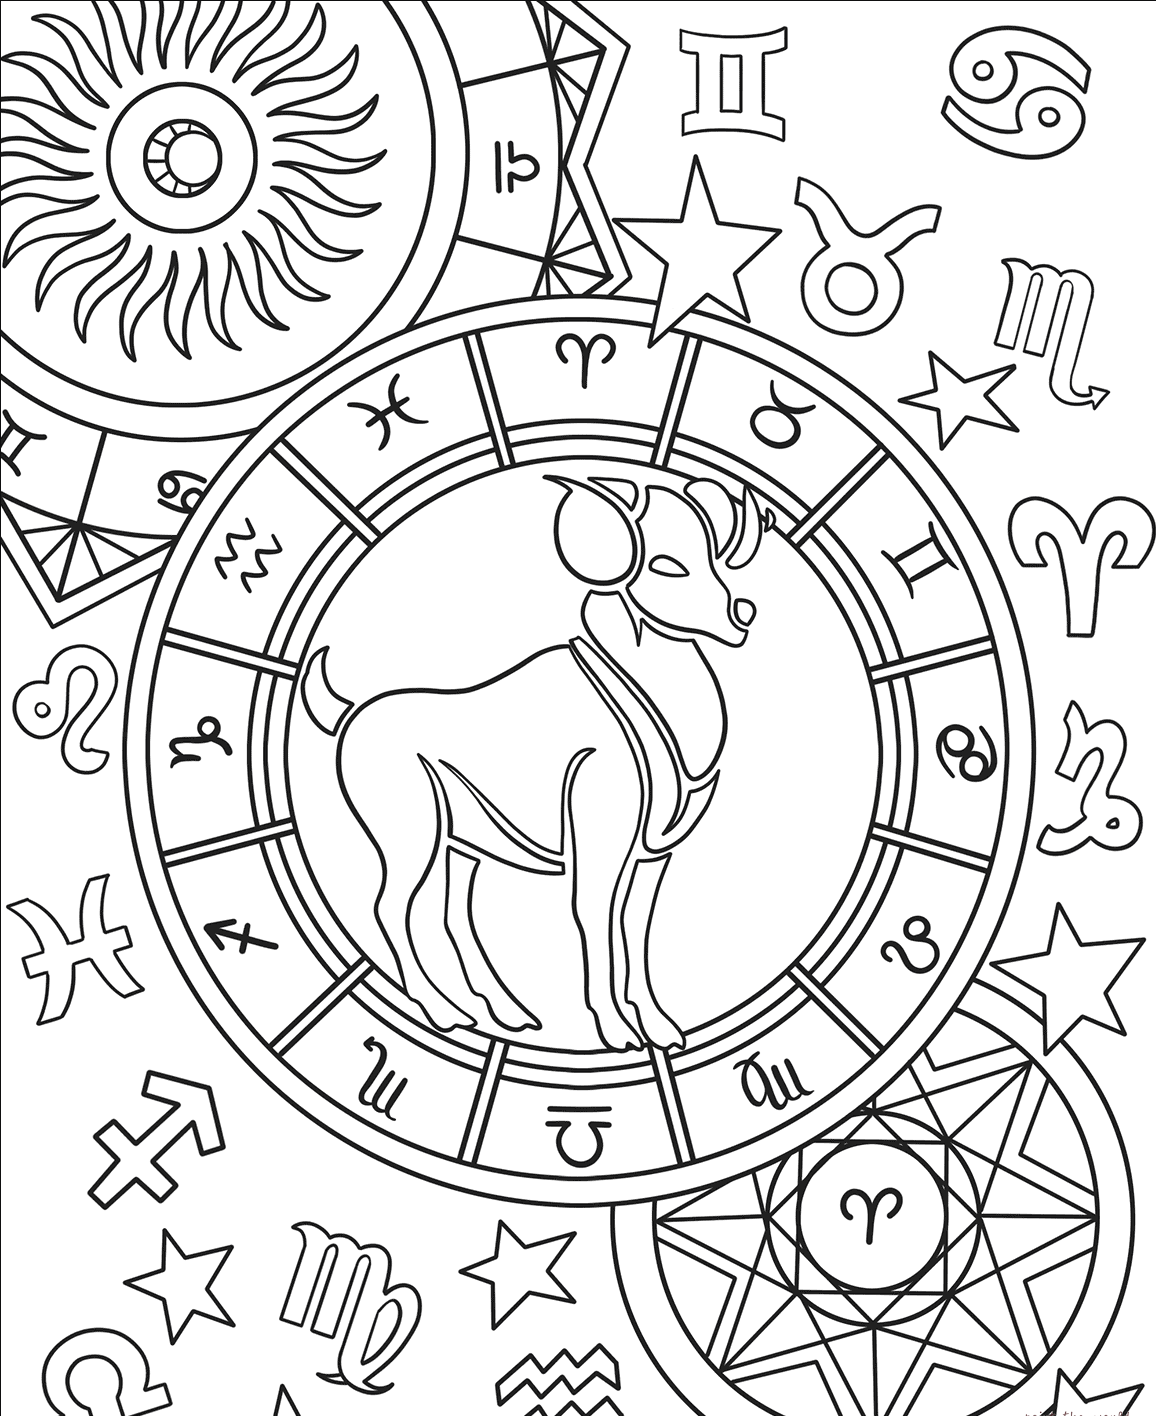 Aries Coloring Pages Pdf to Print - aries zodiac sign coloring page